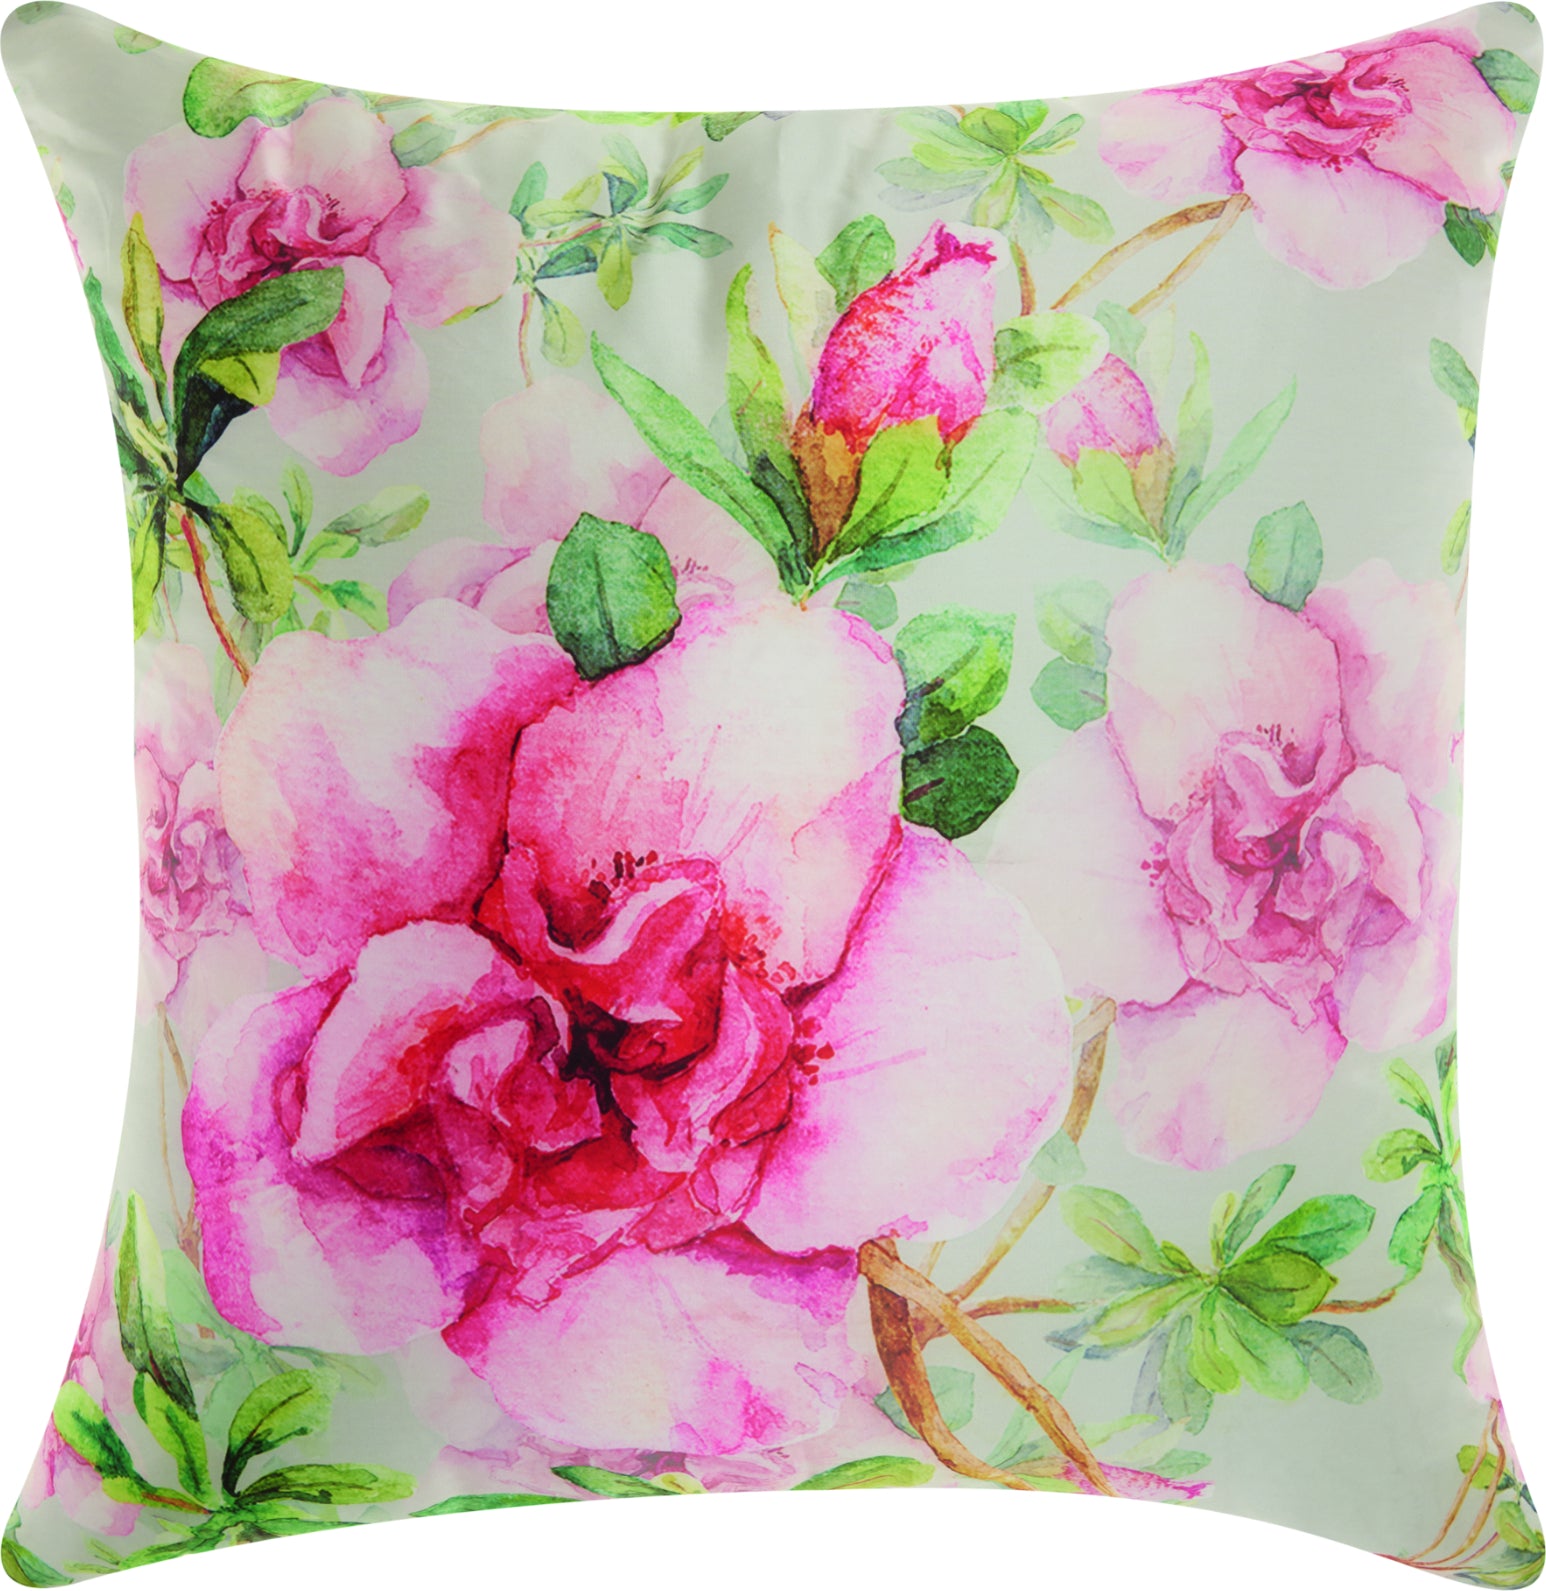 Nourison Outdoor Pillows WATERCOLOR ROSES Multicolor by Mina Victory main image